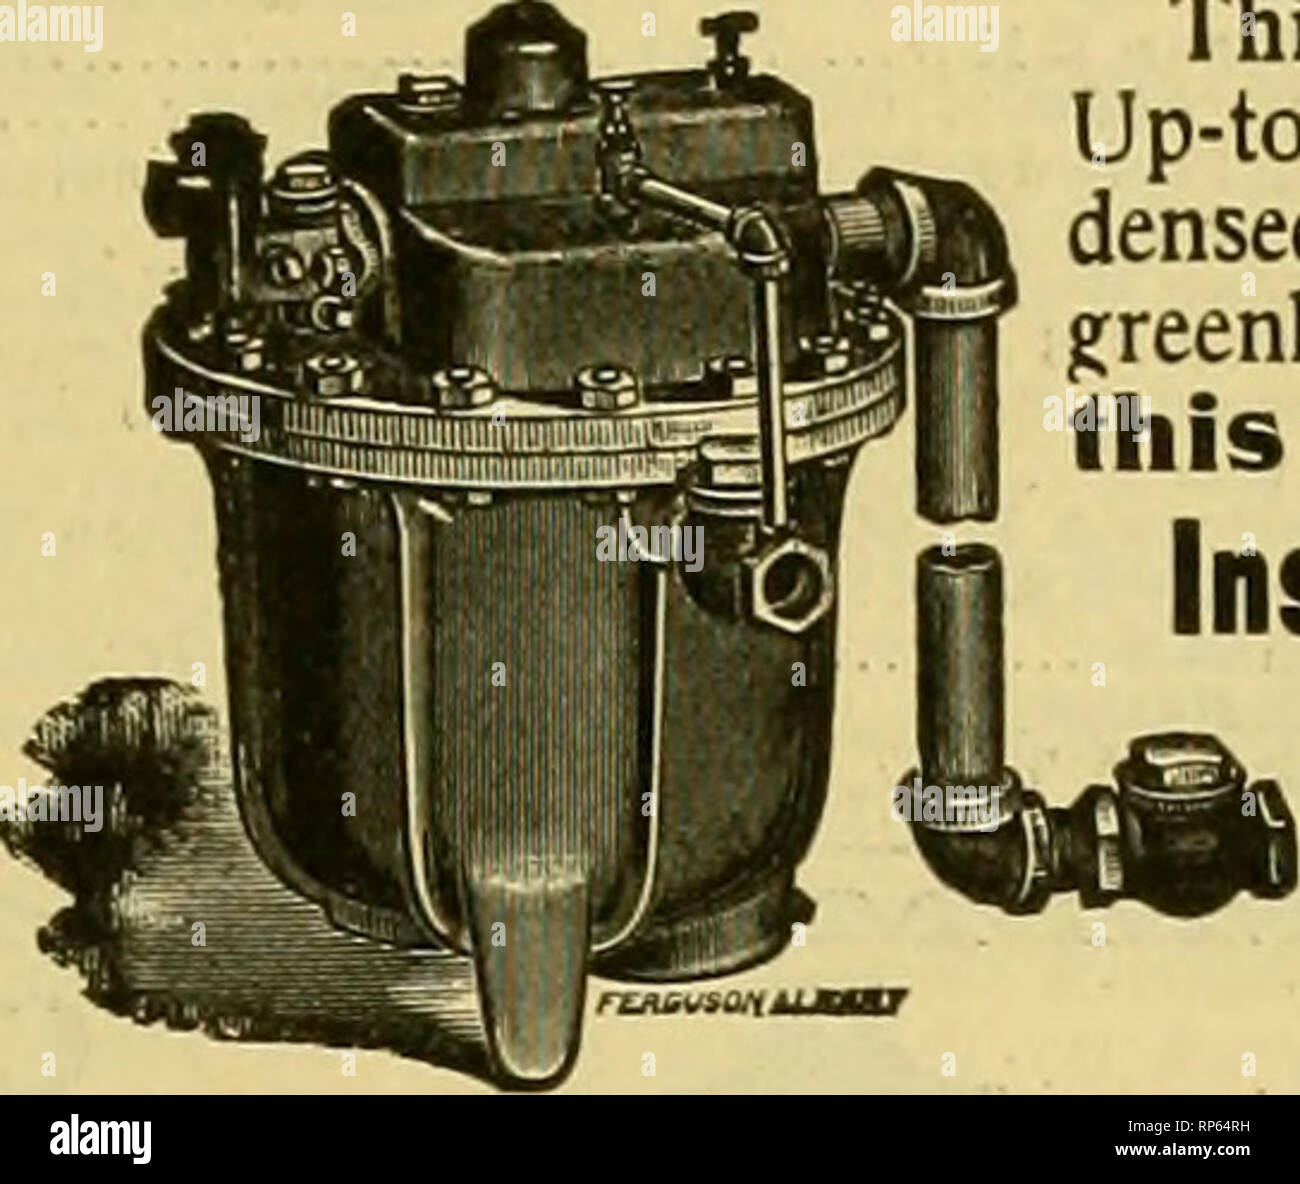 . The American florist : a weekly journal for the trade. Floriculture; Florists. Ho rlfbu » UfU. Box cf i&gt;NO polAlt T&amp; tto. pMtpUd. ffElTKT A- DREER. Steam Traps ^coal This is the Return Steam Trap used by the Up-to-date Greenhouse men to return the con- densed water from the heating coils in their greenhouses. Have been in use for this purpose over thirty years. Insures an Even Temperature.. Send lor Red Catalogue. Albany Steam Trap Go. ALBANY, N. Y., U. S. A. Please m^ention the American Florist when writing. THE 'Mr' Glazing Point ZINC, DURABLE, PRACTICAL. Designed for Florists' use  Stock Photo